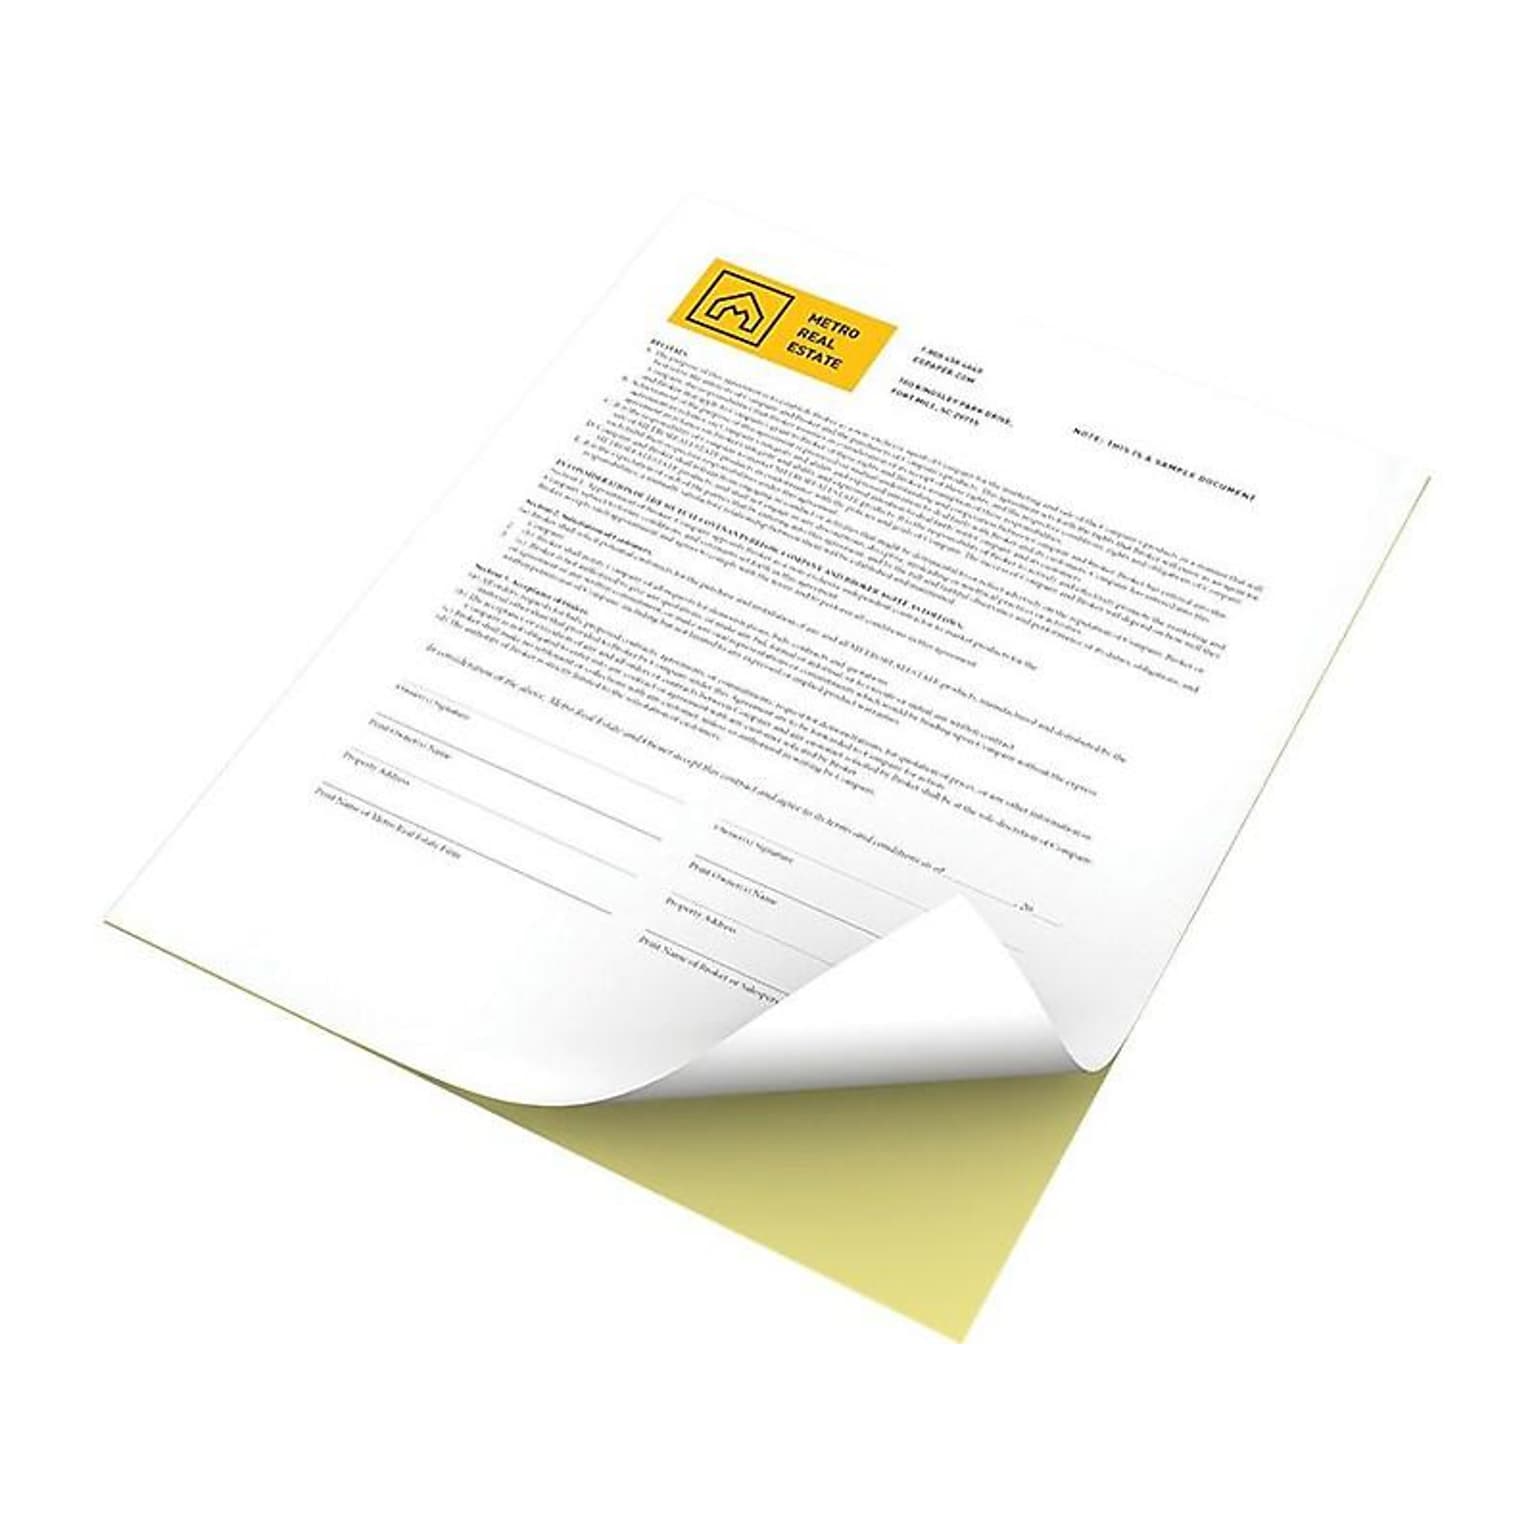 Xerox Revolution Carbonless Paper, 8.5 x 11, White/Canary, 2500/Carton (3R12420)